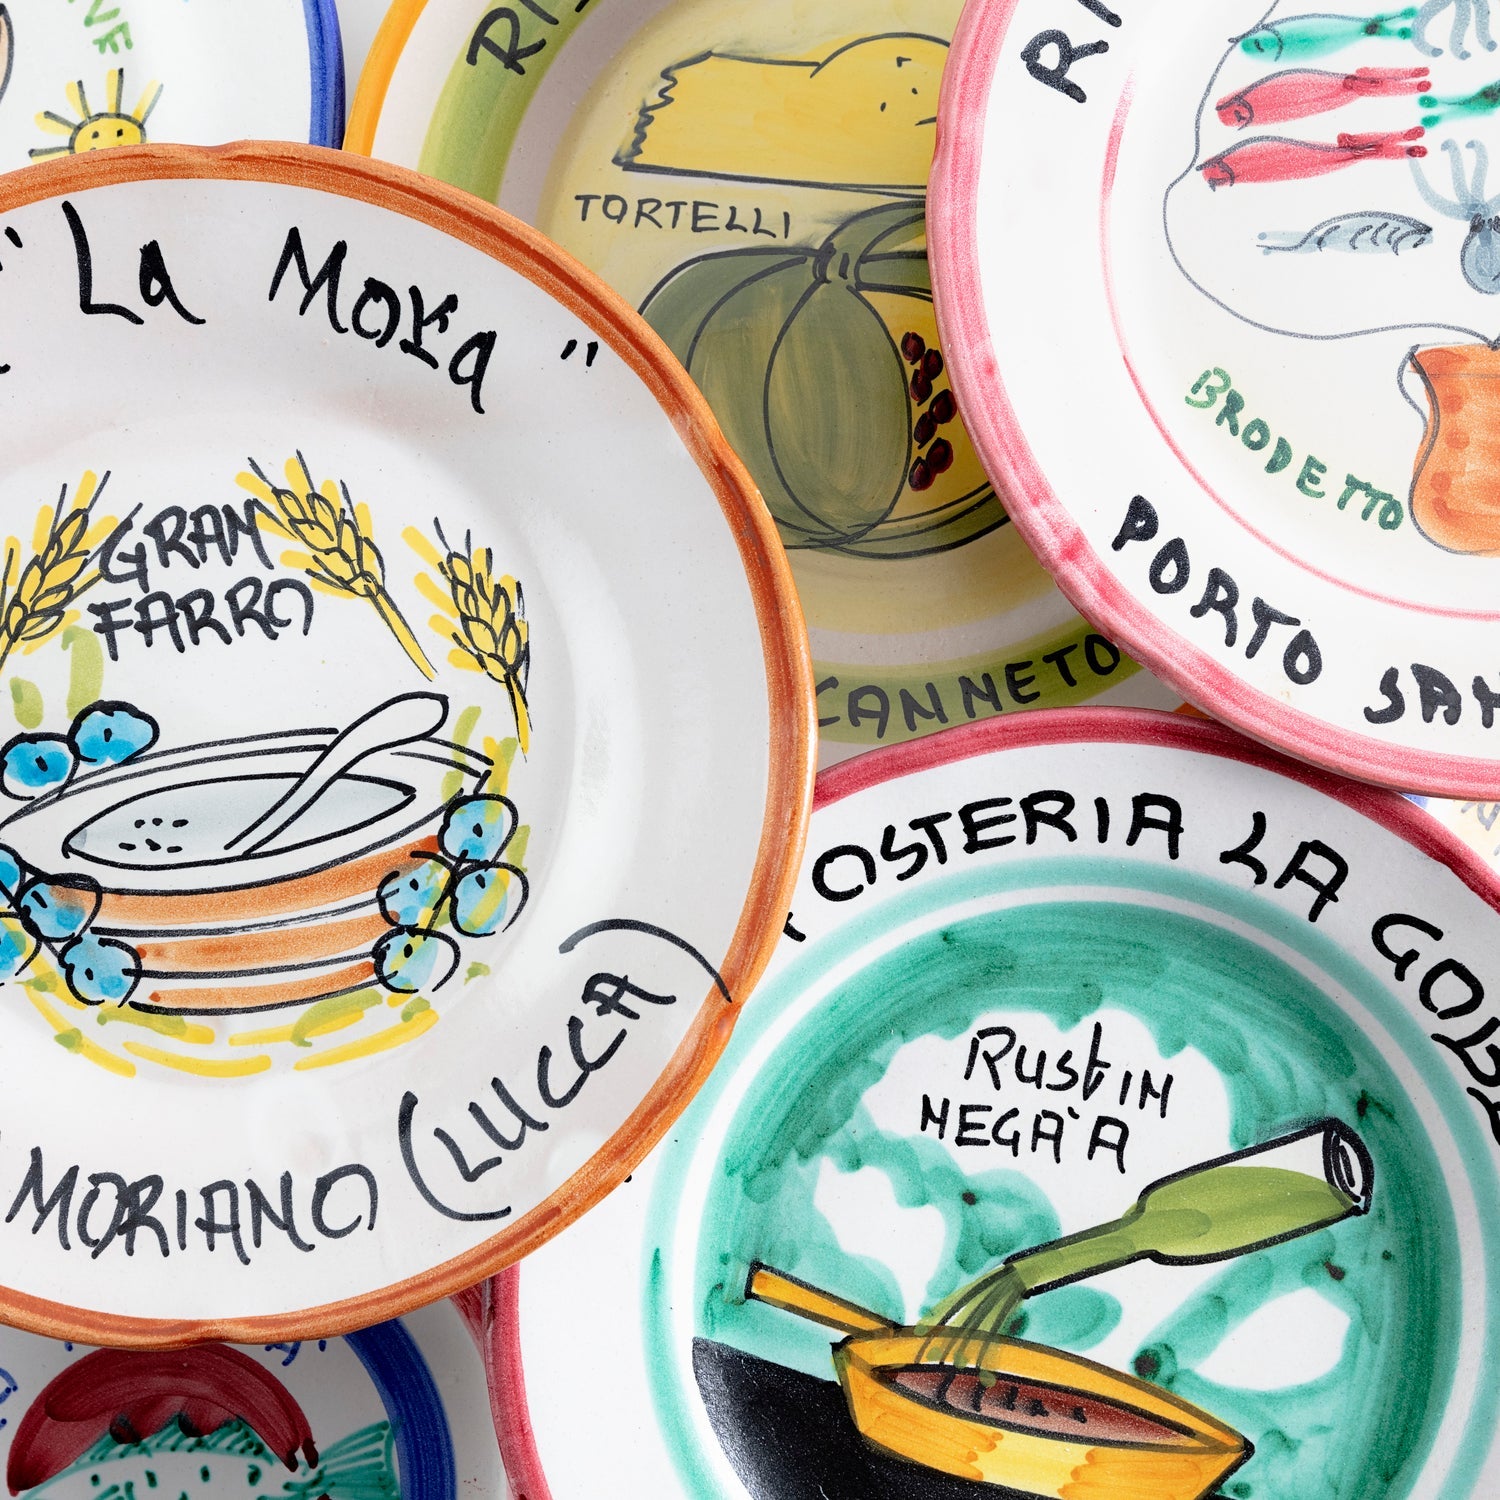 A vibrant collection of hand-painted ceramic plates with food-themed designs.